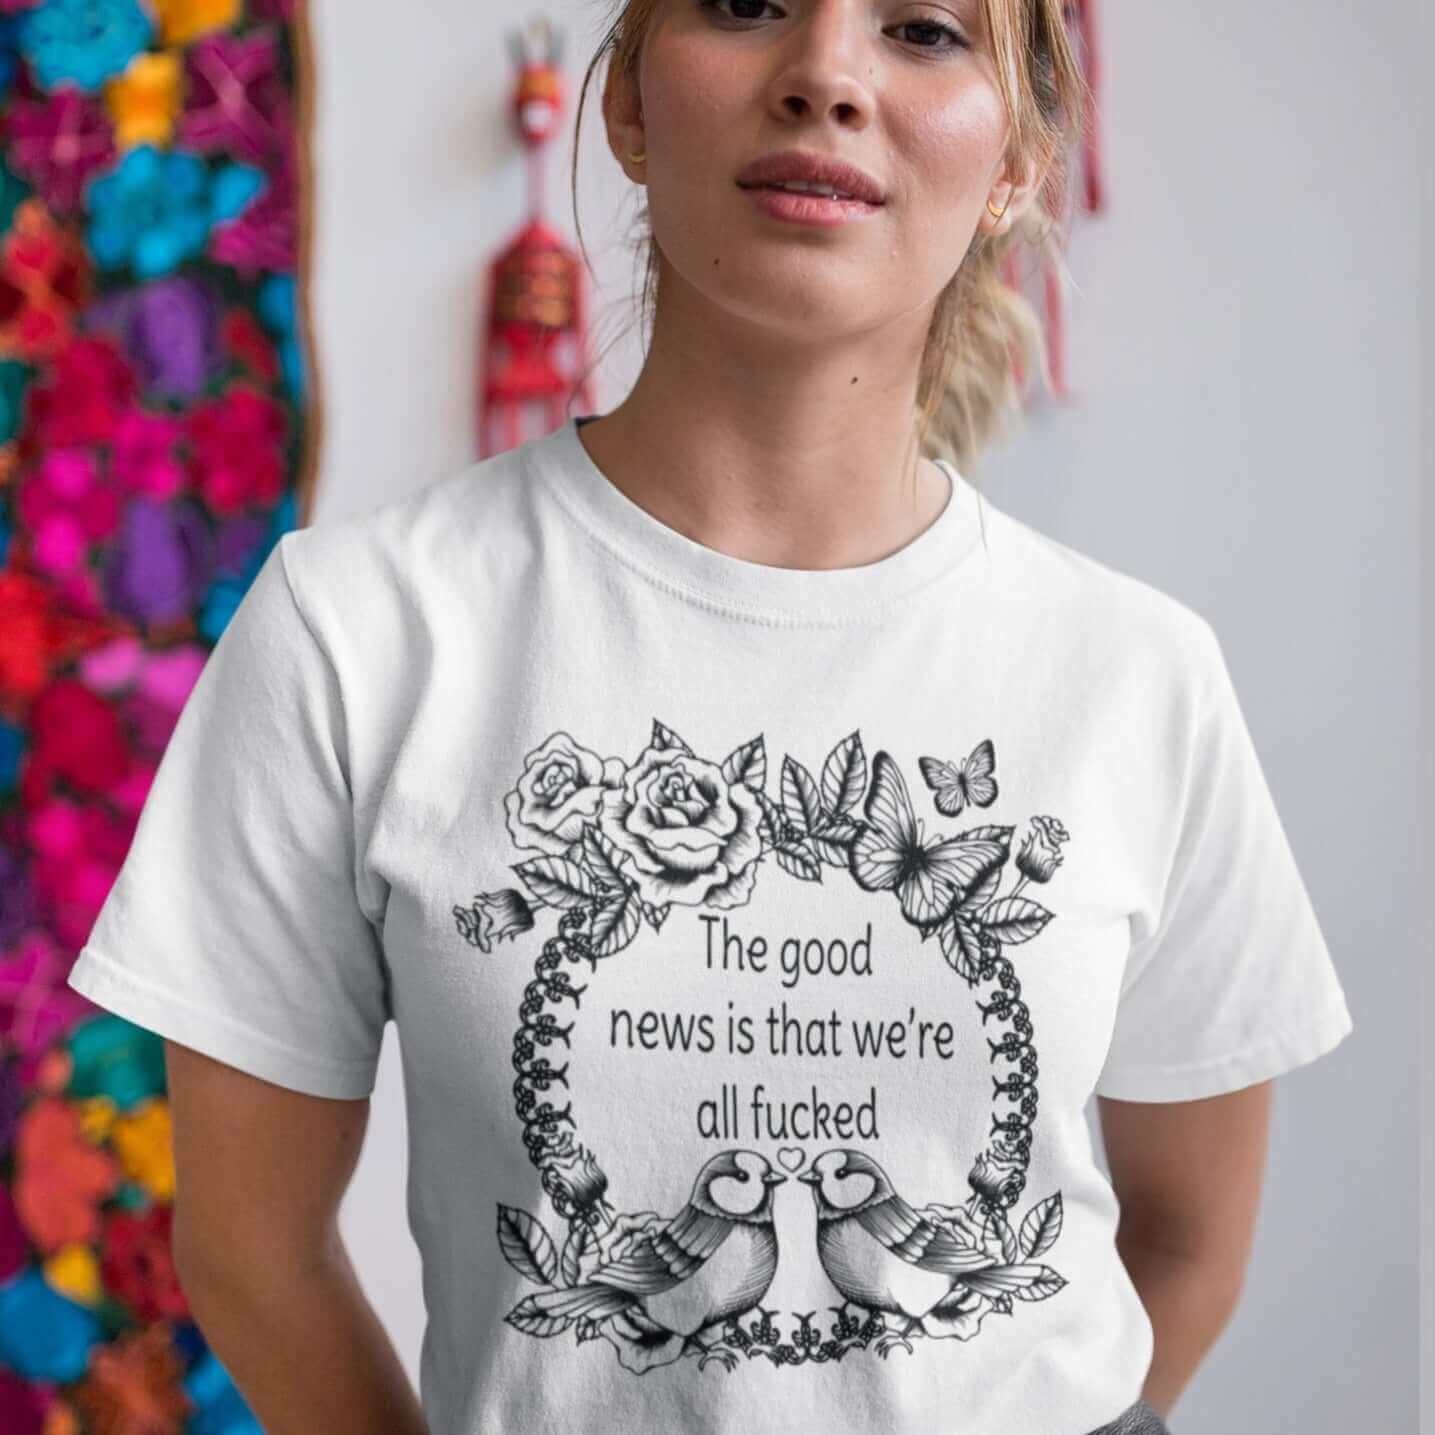 Woman wearing a white t-shirt that has an image of a line drawing wreath with butterflies, sparrows and roses. The phrase The good news is that we're all fucked printed inside of the wreath. The graphics are printed on the front of the shirt.